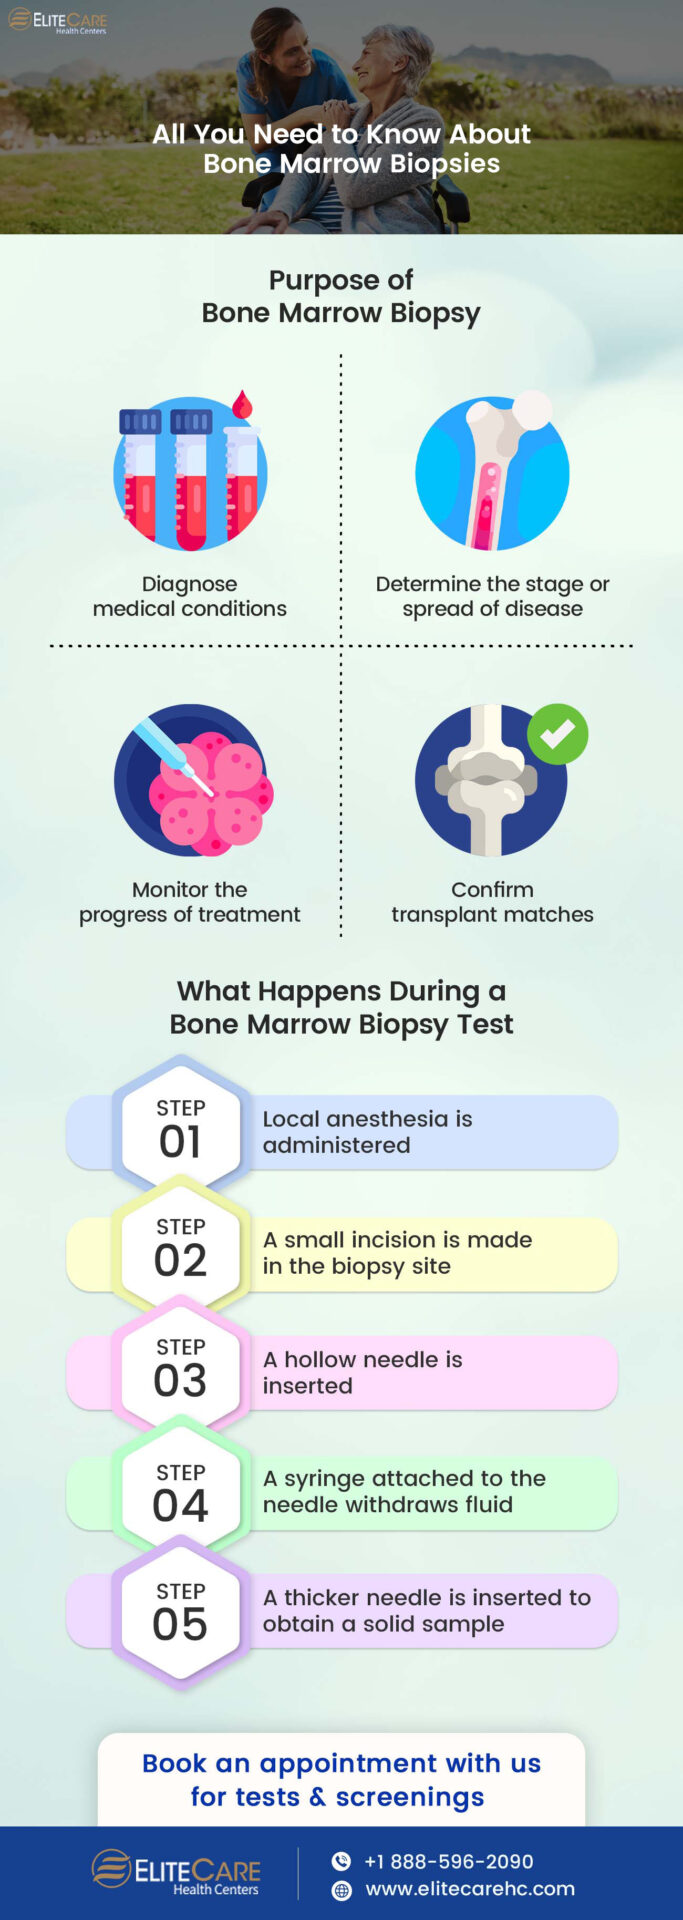 All You Need to Know About Bone Marrow Biopsies | Infographic